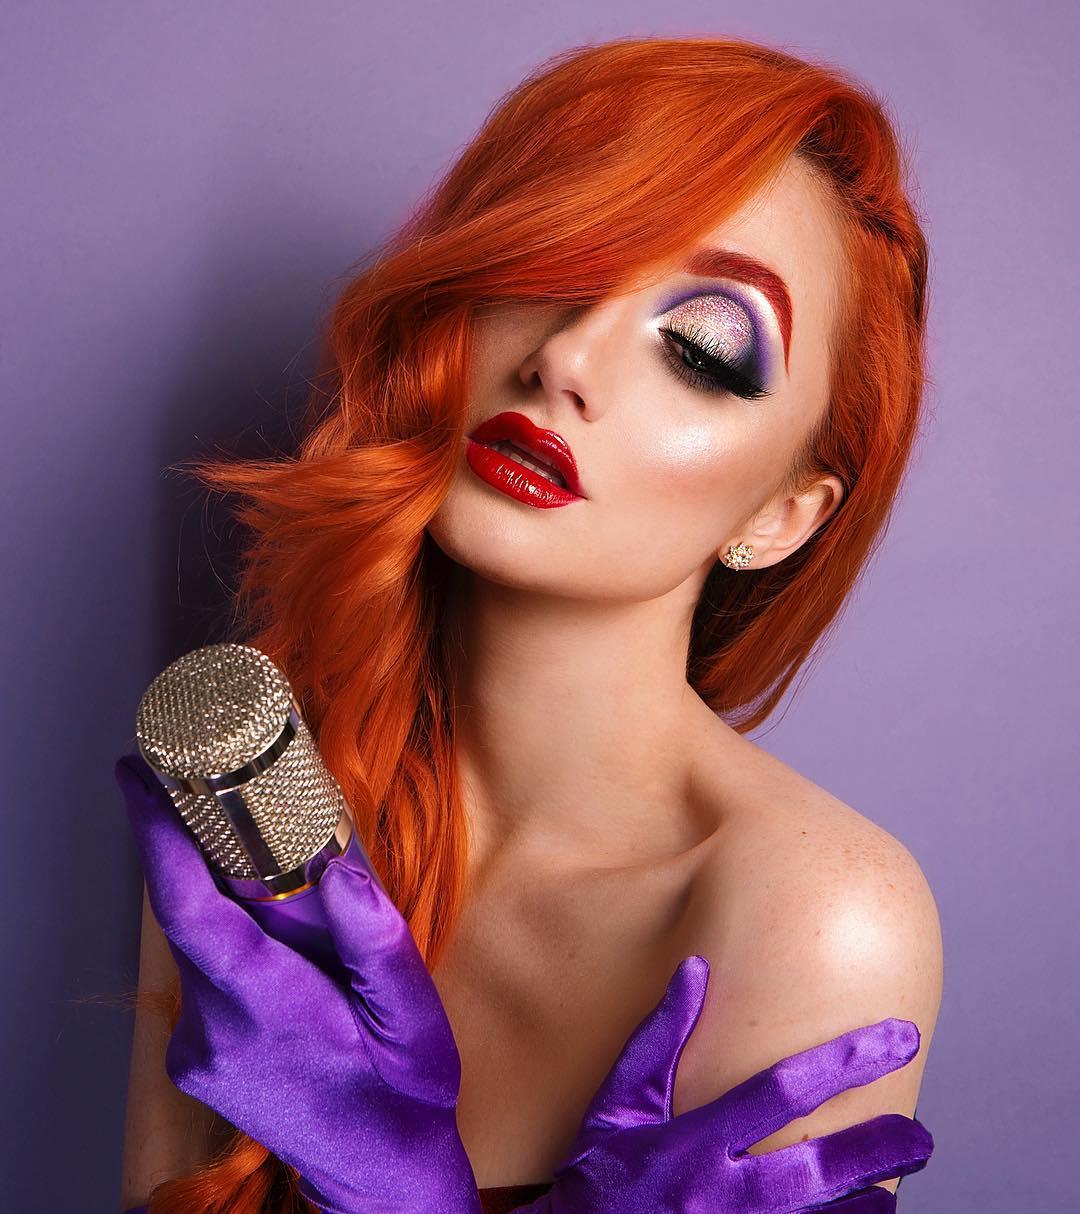 “😍😍Obsessed with this Jessica Rabbit look for Halloween! 